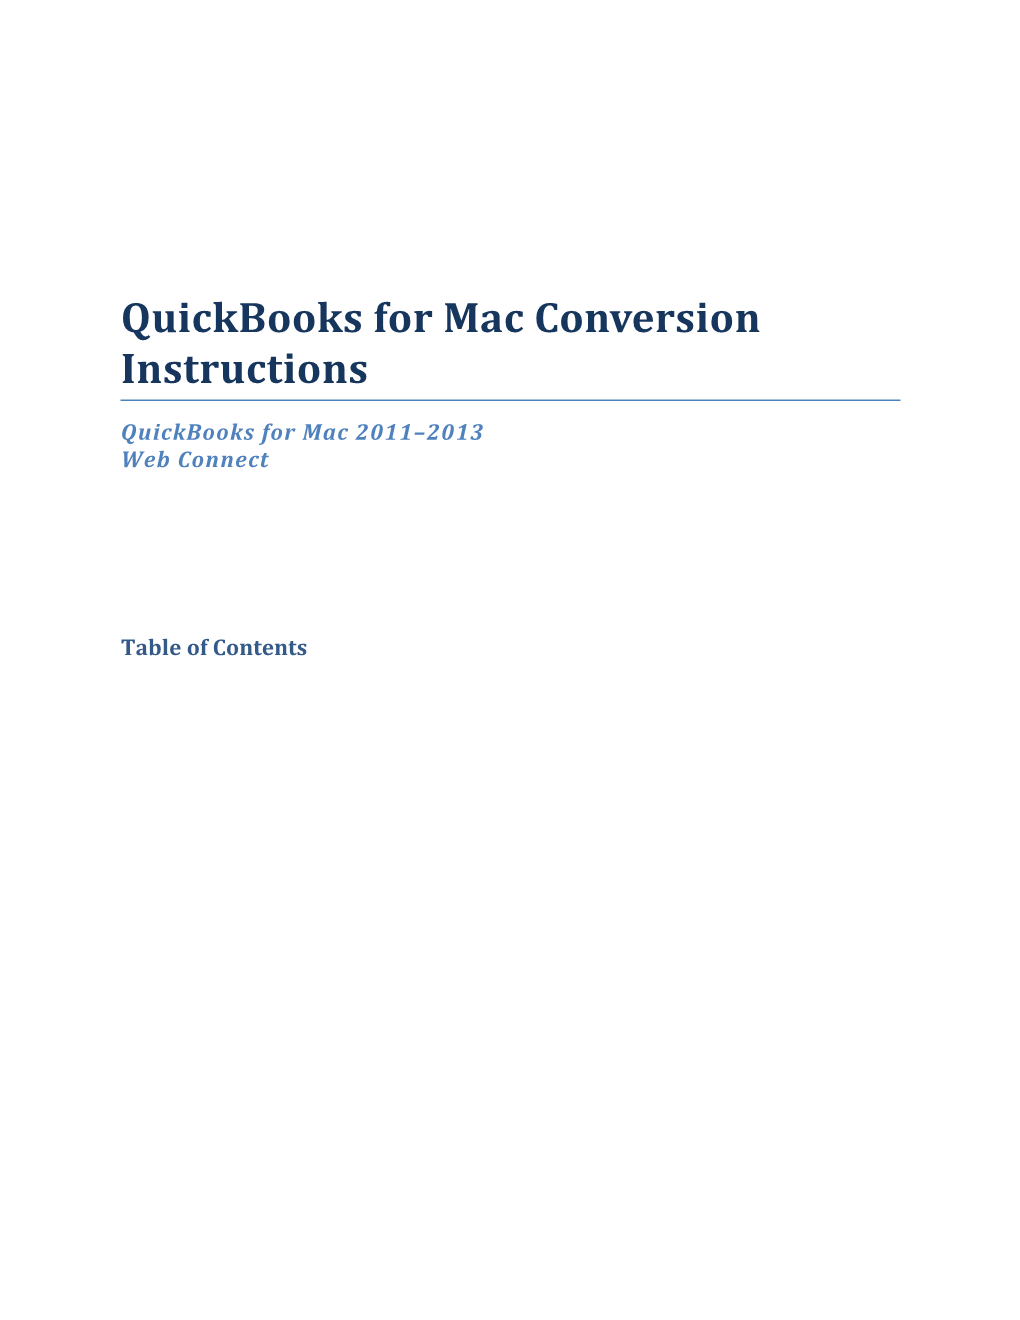 Quickbooks for Mac Conversion Instructions s2